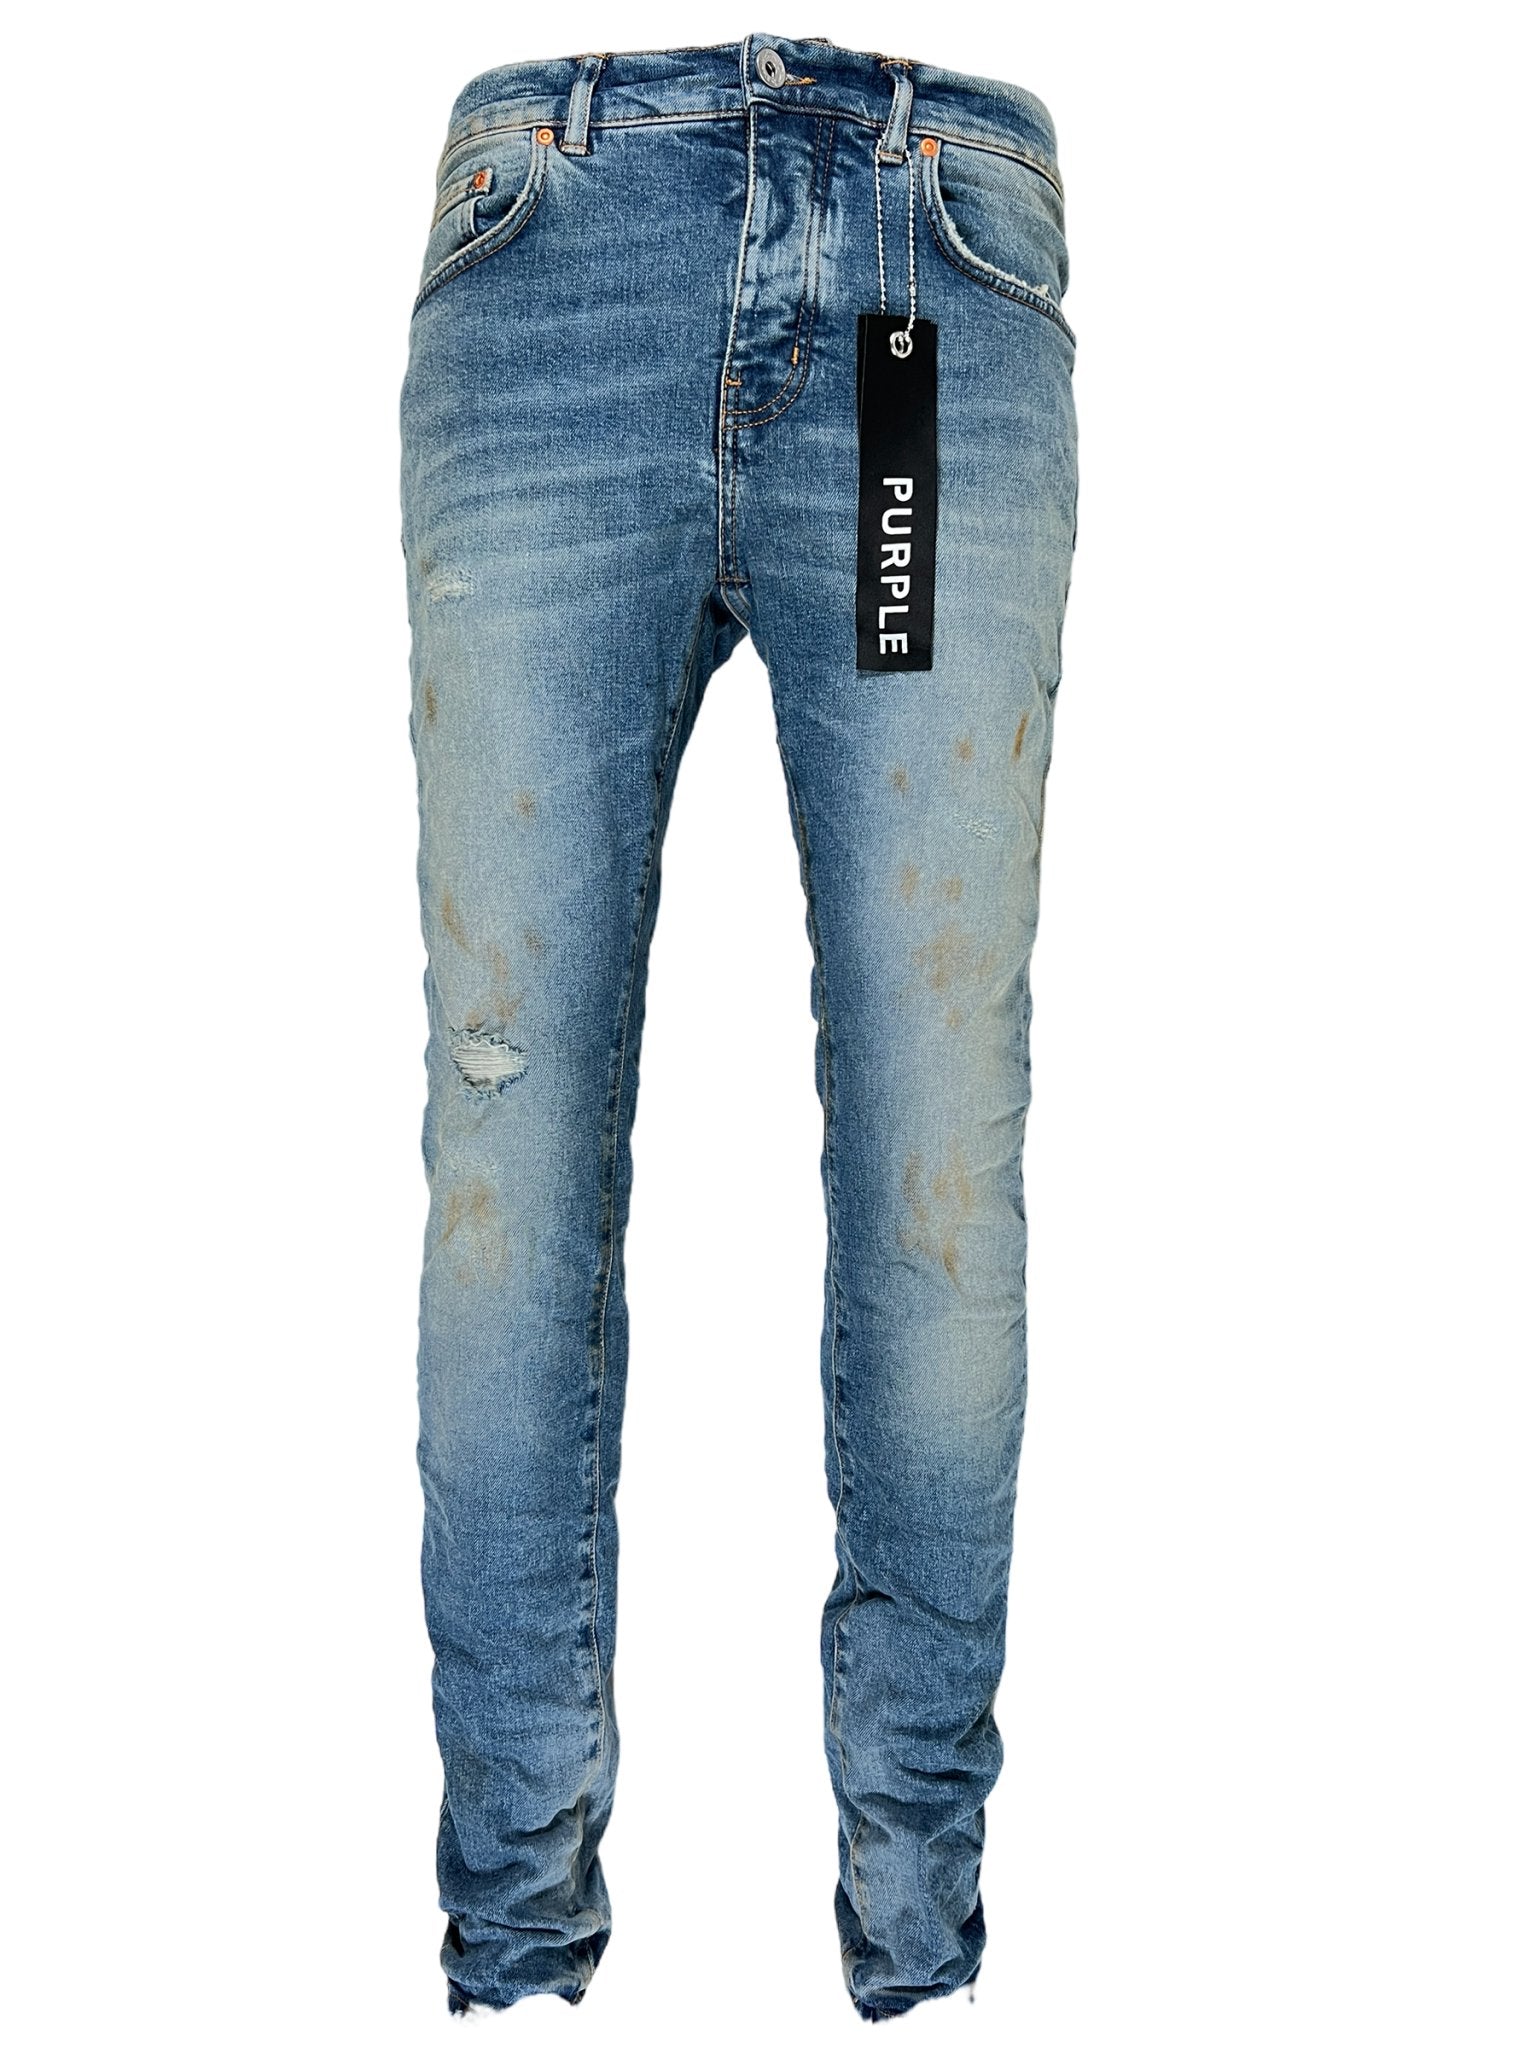 Purple-Brand Jeans - Limited Edition - Blue and Brown - P001 – Dabbous